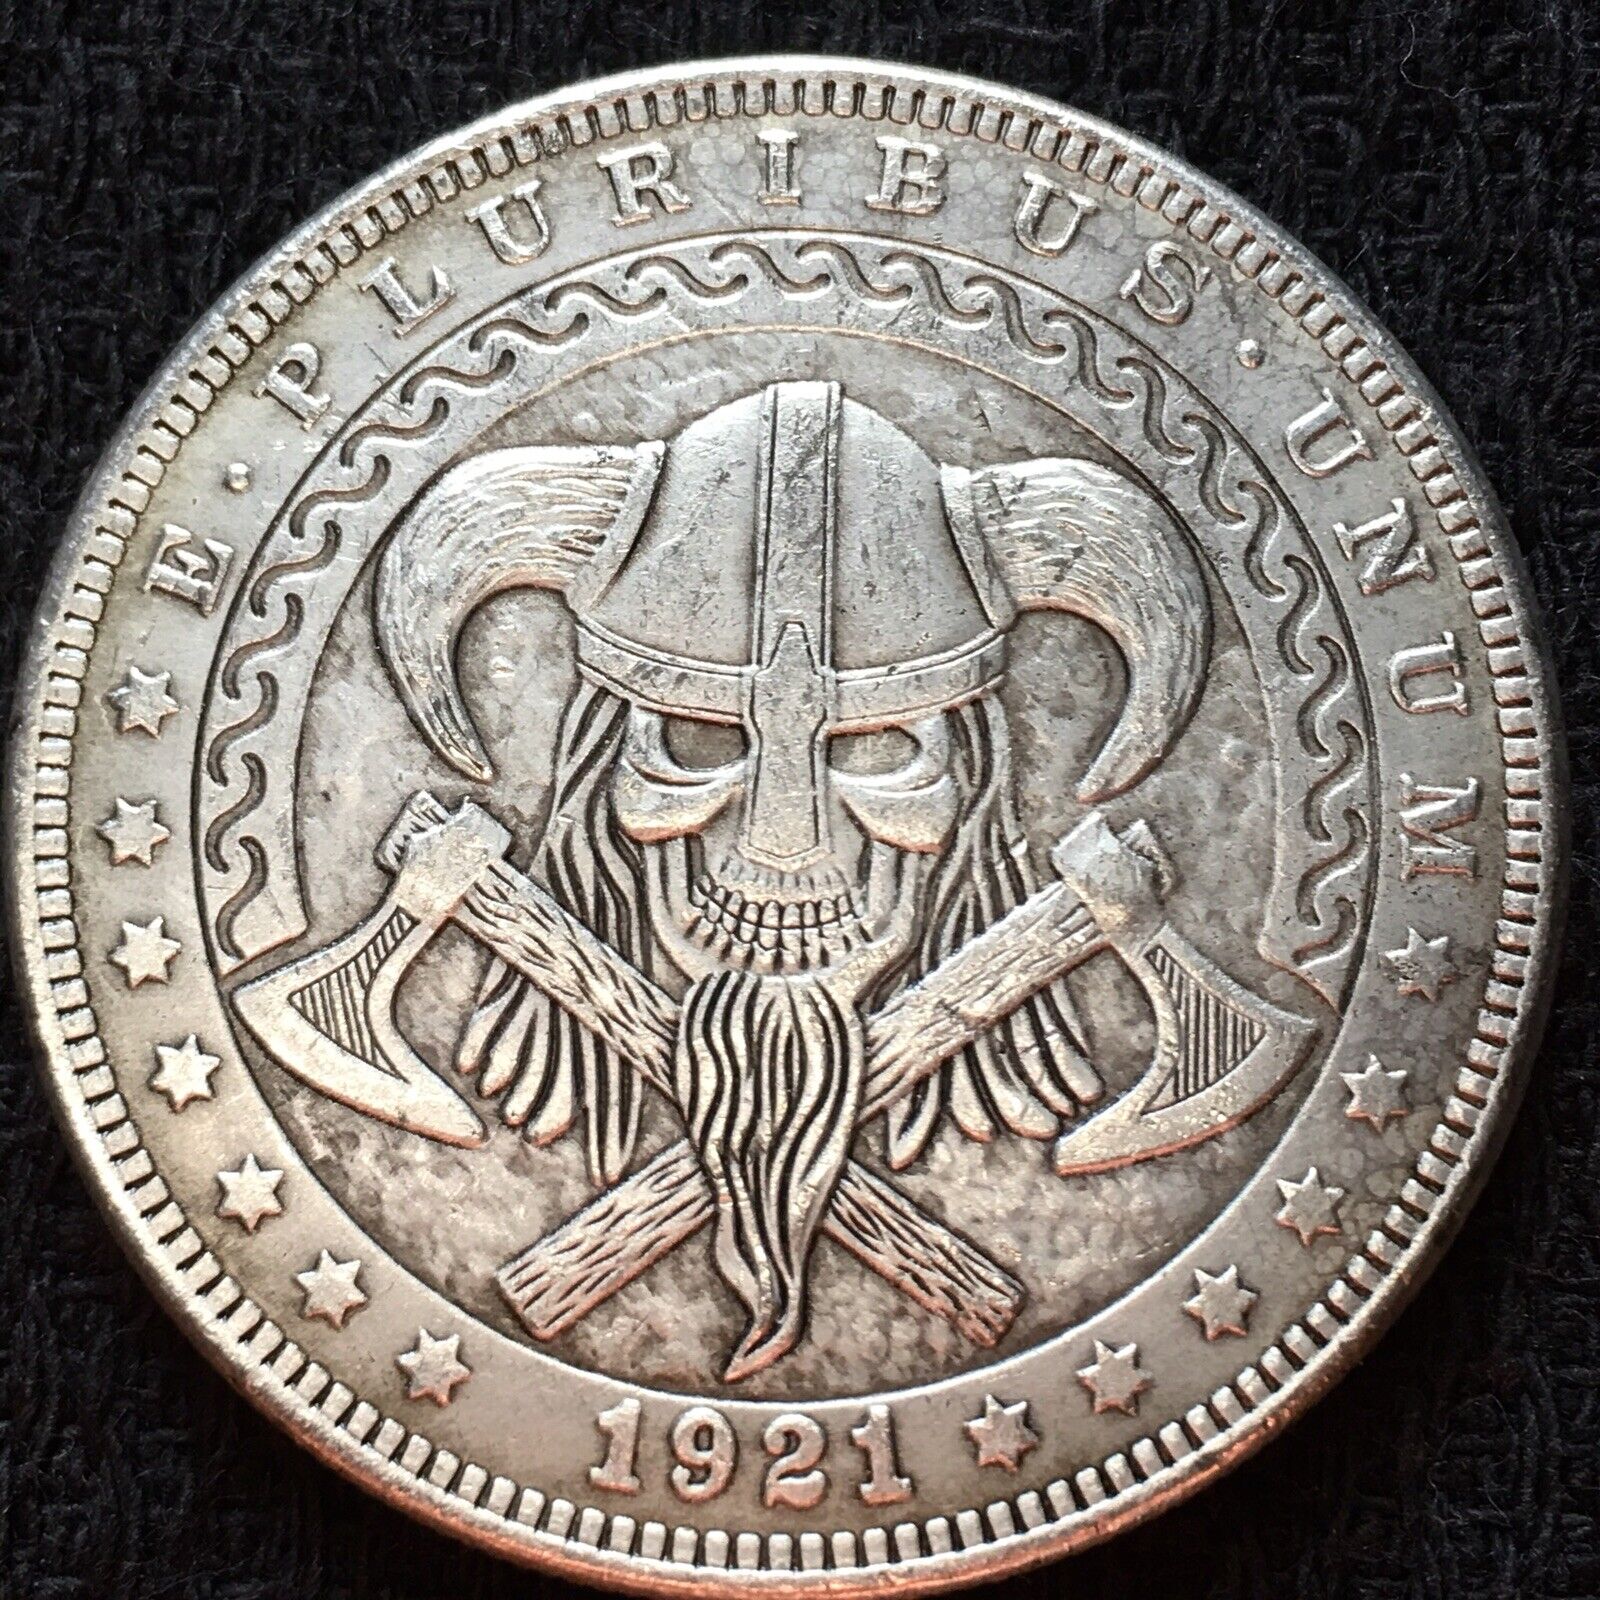 Norse Viking Skull Double Ax Novelty Good Luck Heads Tails Challenge Coin #296